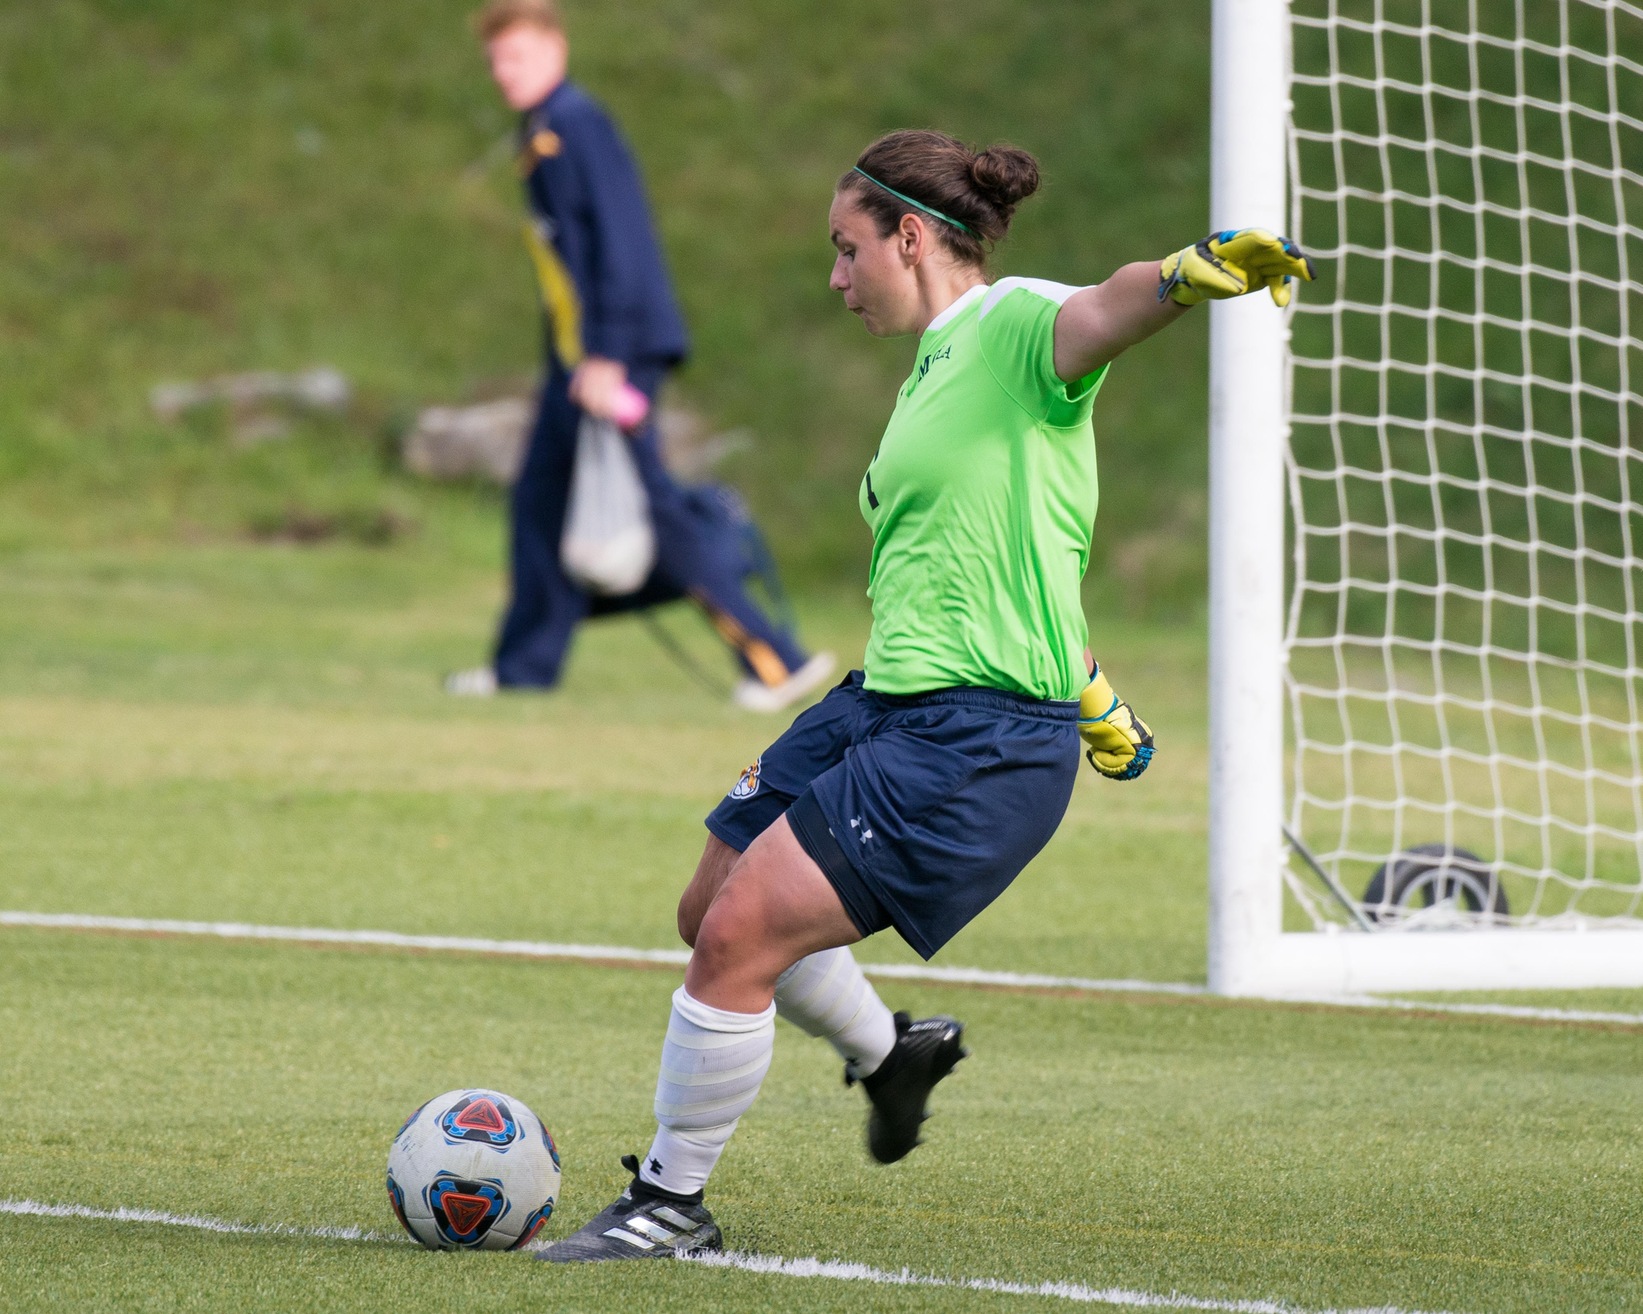 Women's Soccer downed by Owls 5-0 in MASCAC play